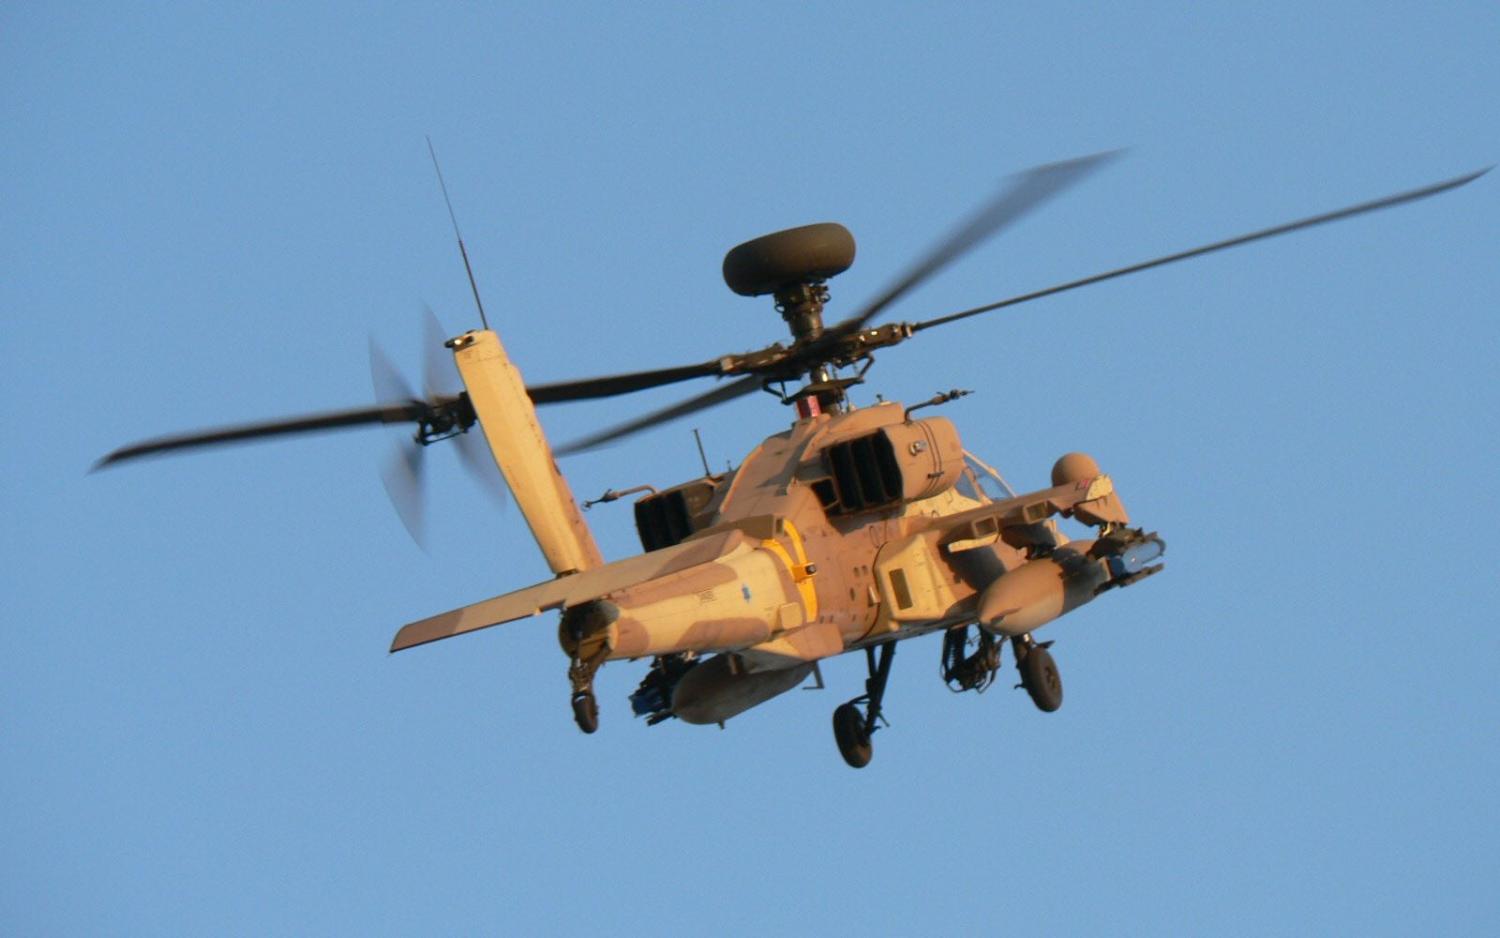 An Israeli Air Force Apache helicopter (Photo: Galit/Flickr)